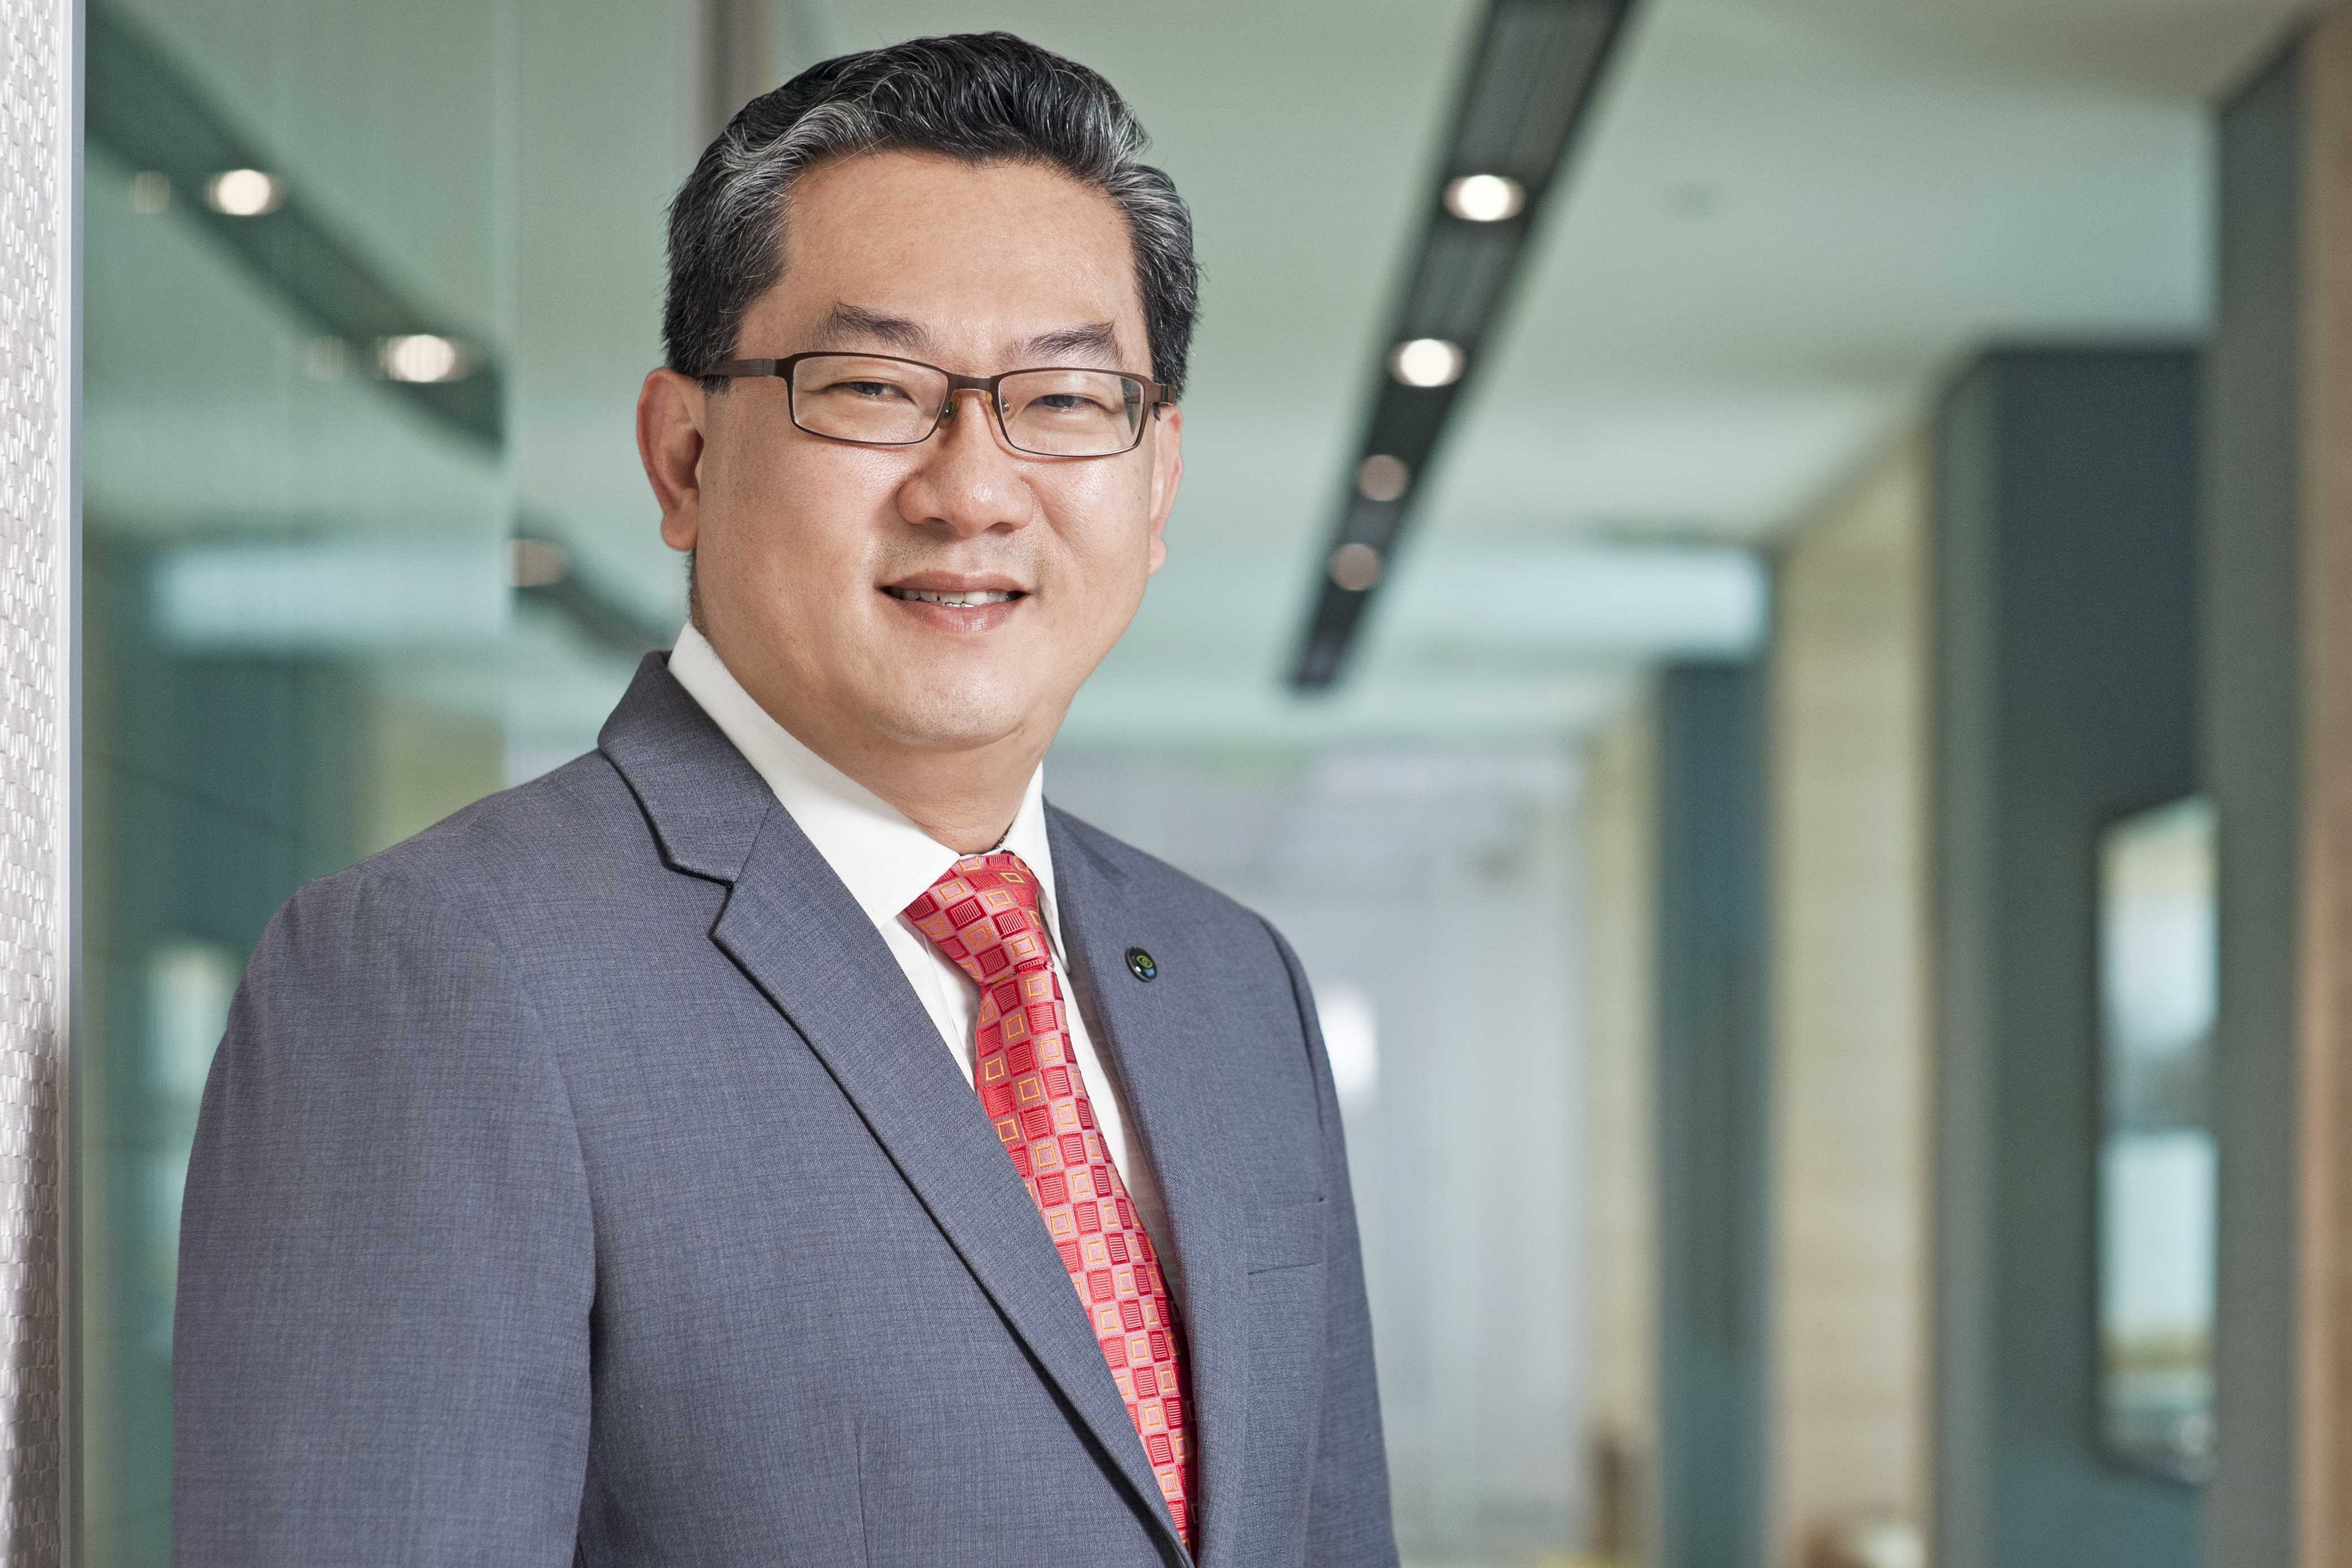 Mr Keoy Soo Earn of Deloitte was part of the Financial Advisory arm's workplace transformation project